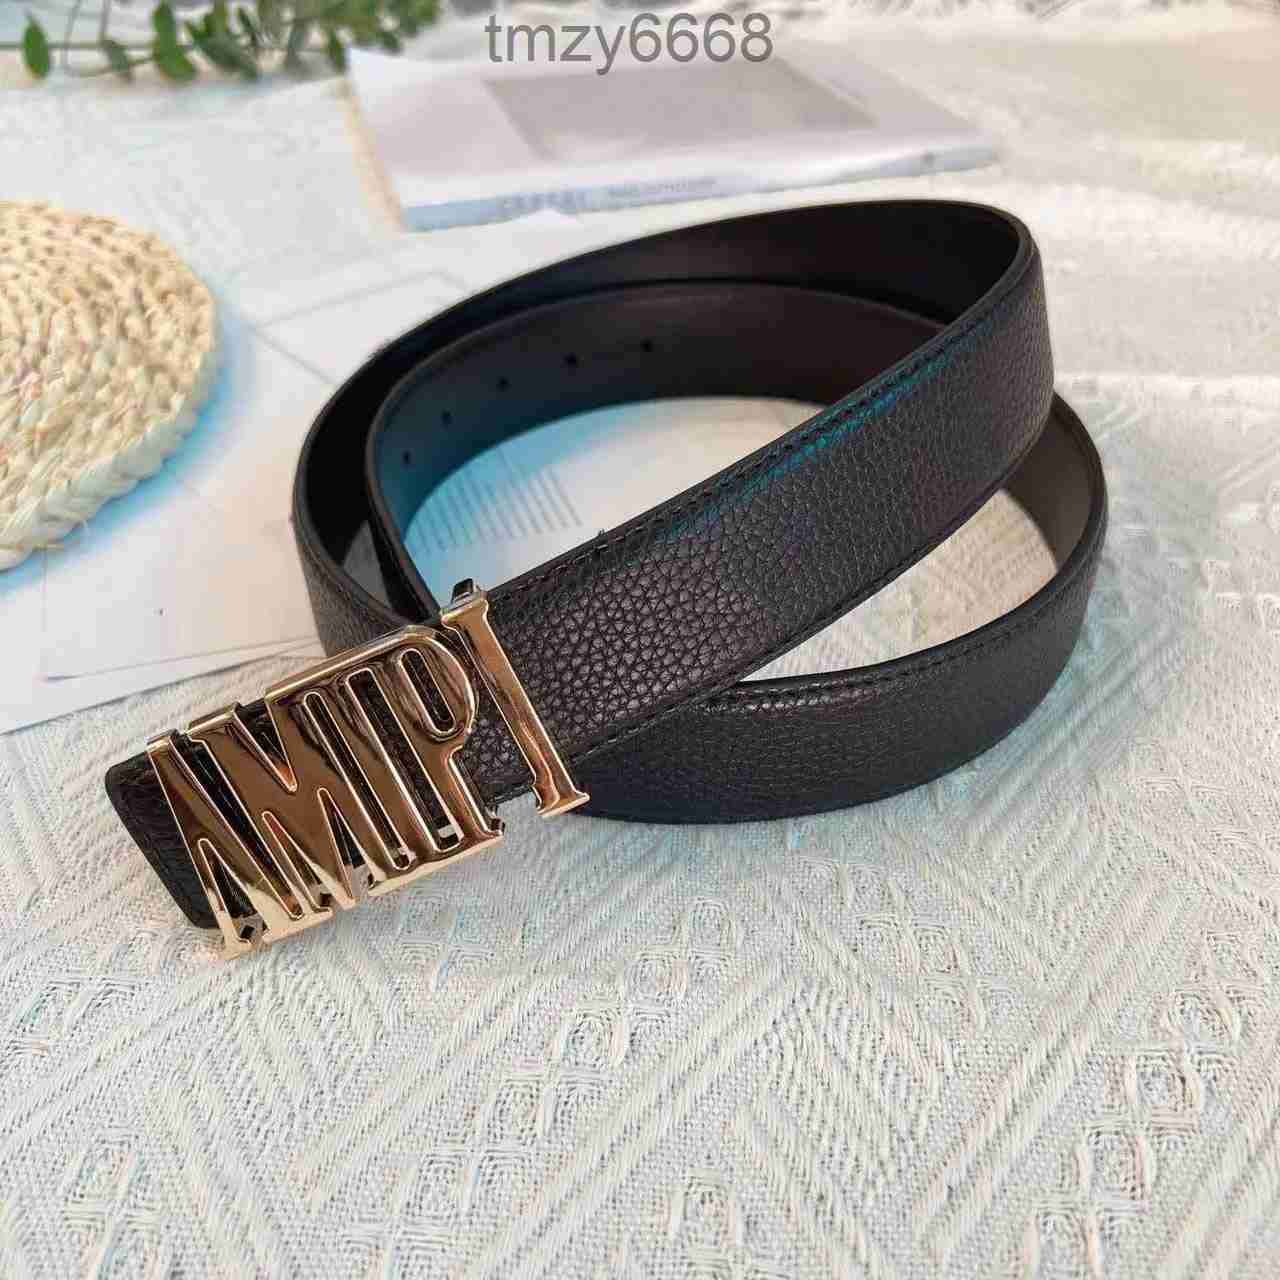 Mens Designer Belt Luxury Brand Letters Buckle Waistbands for Women Fashion Silver Belts Classic Office Waistband Gifts Width 38mm -4 7P6I